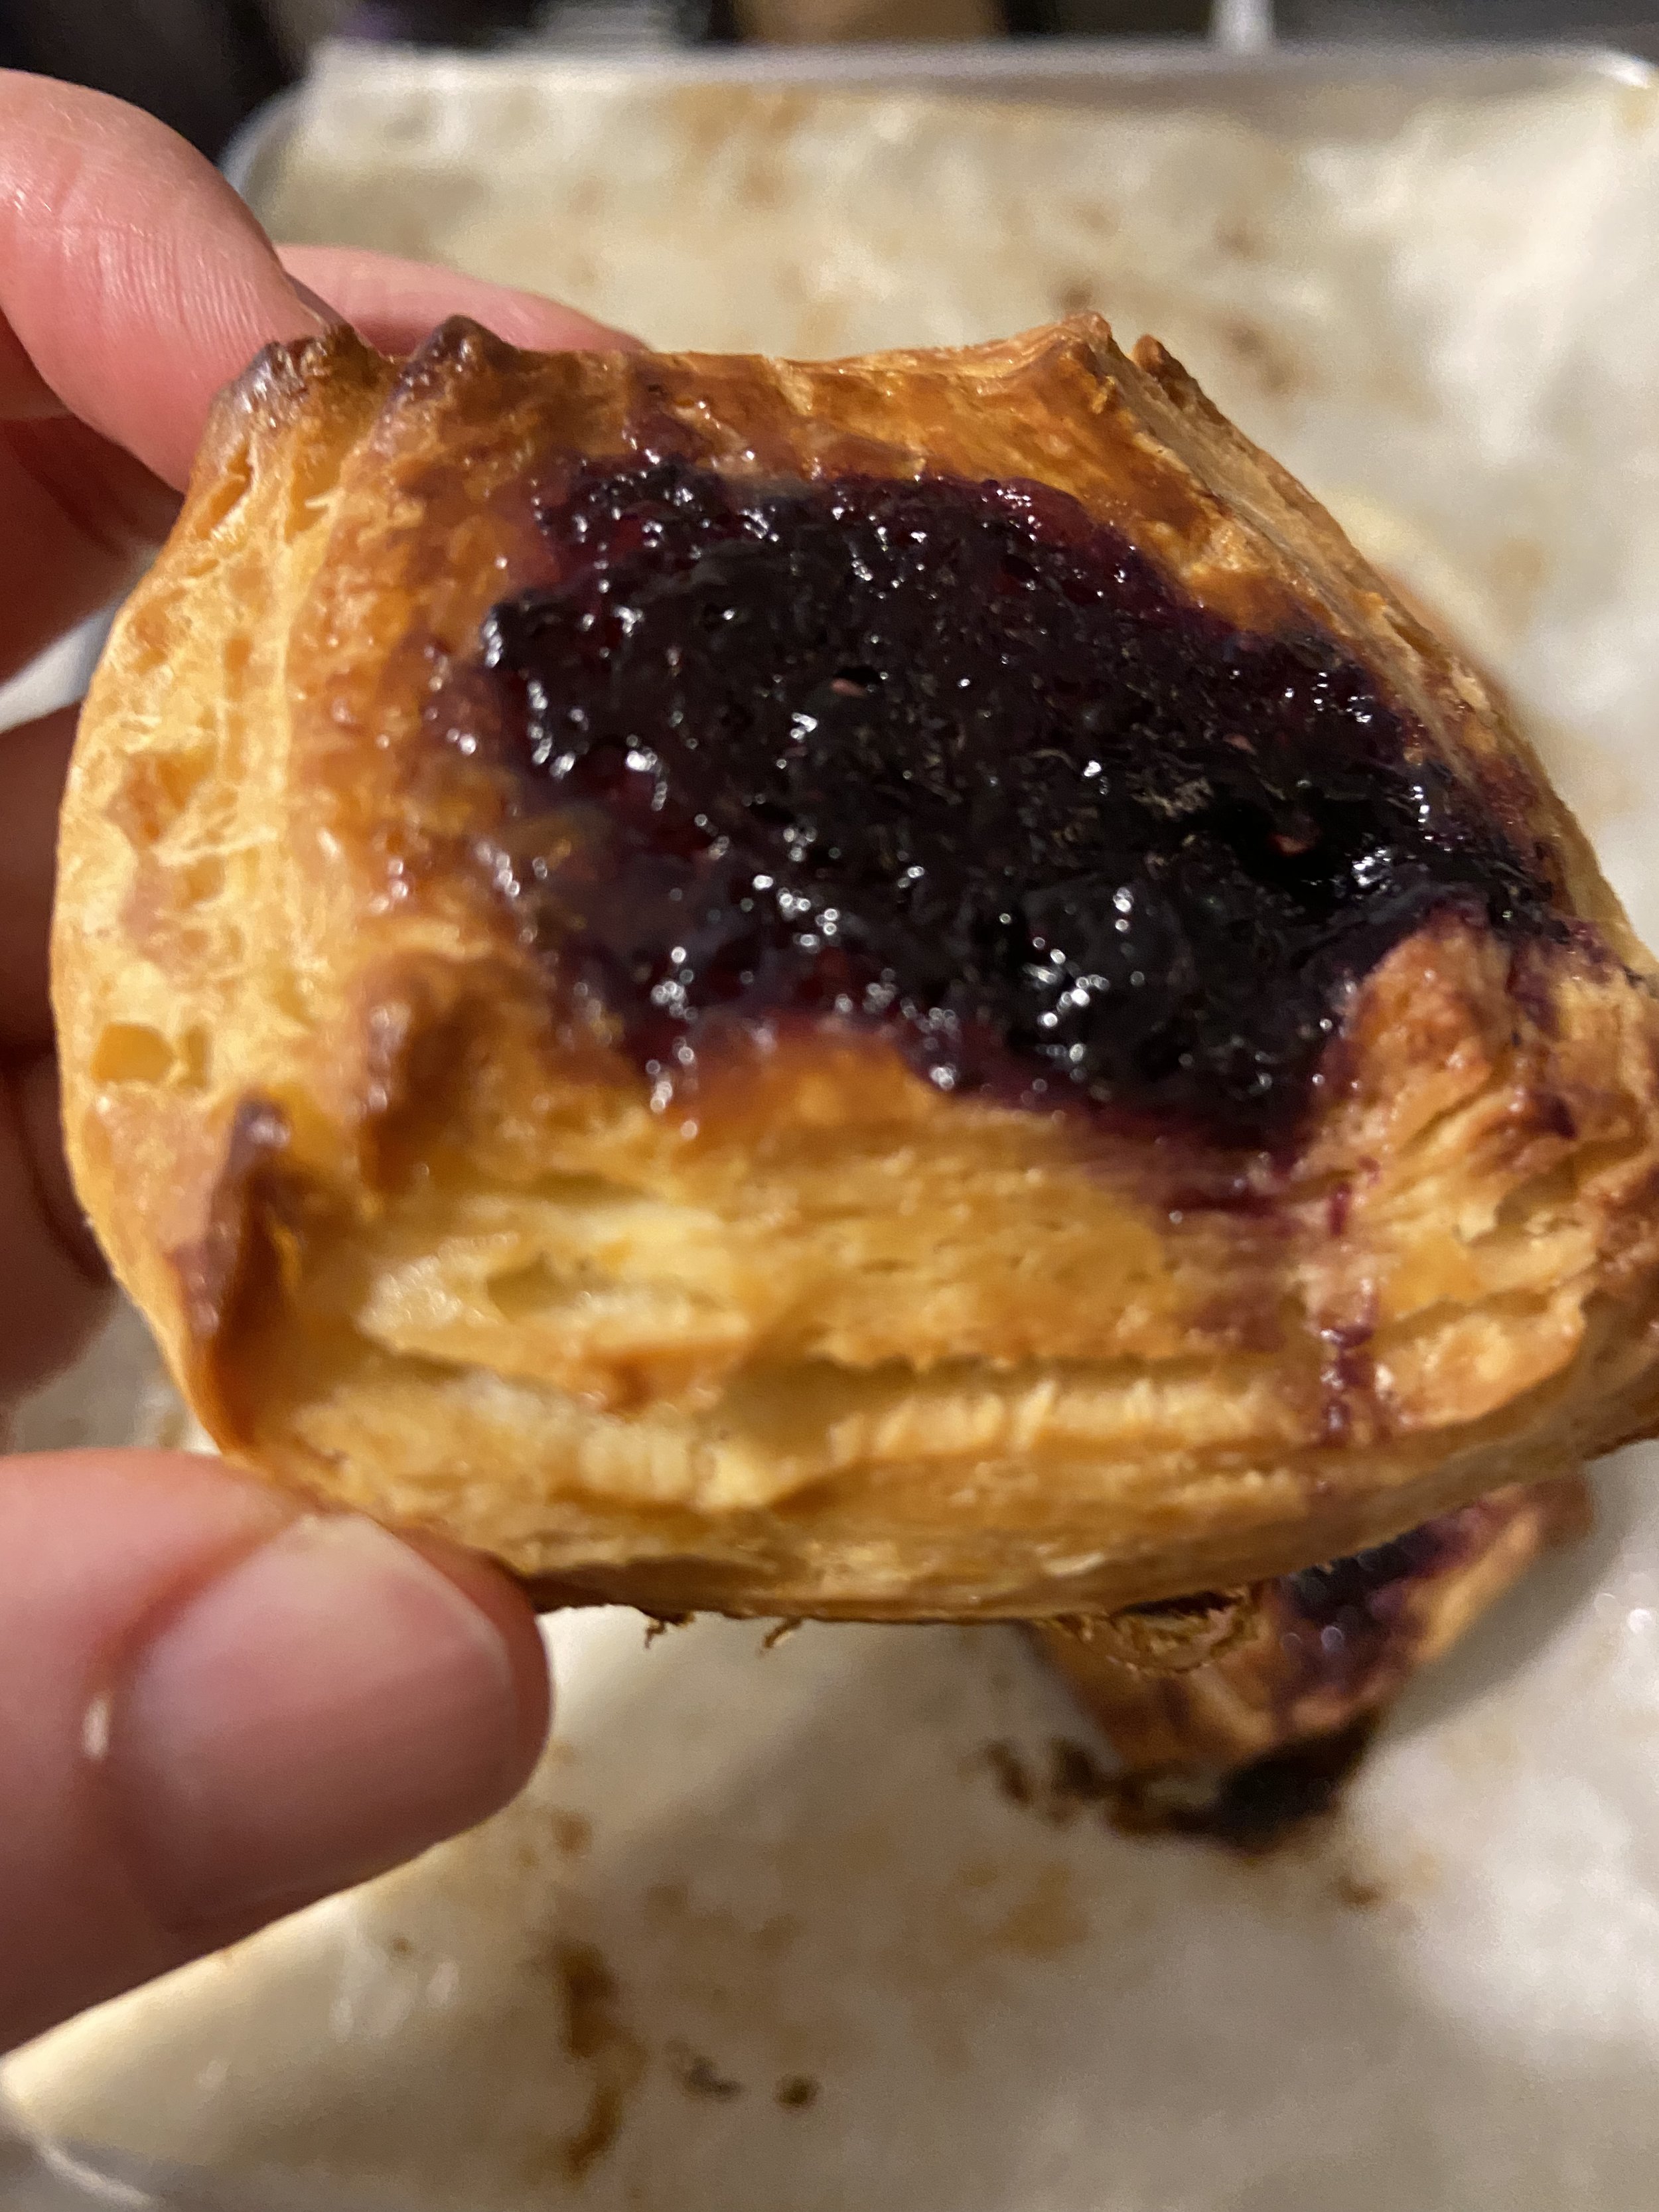 2 DAY IN PERSON FRUIT DANISH BAKING MASTERCLASS- May 4th & 5th- 1 spot left!